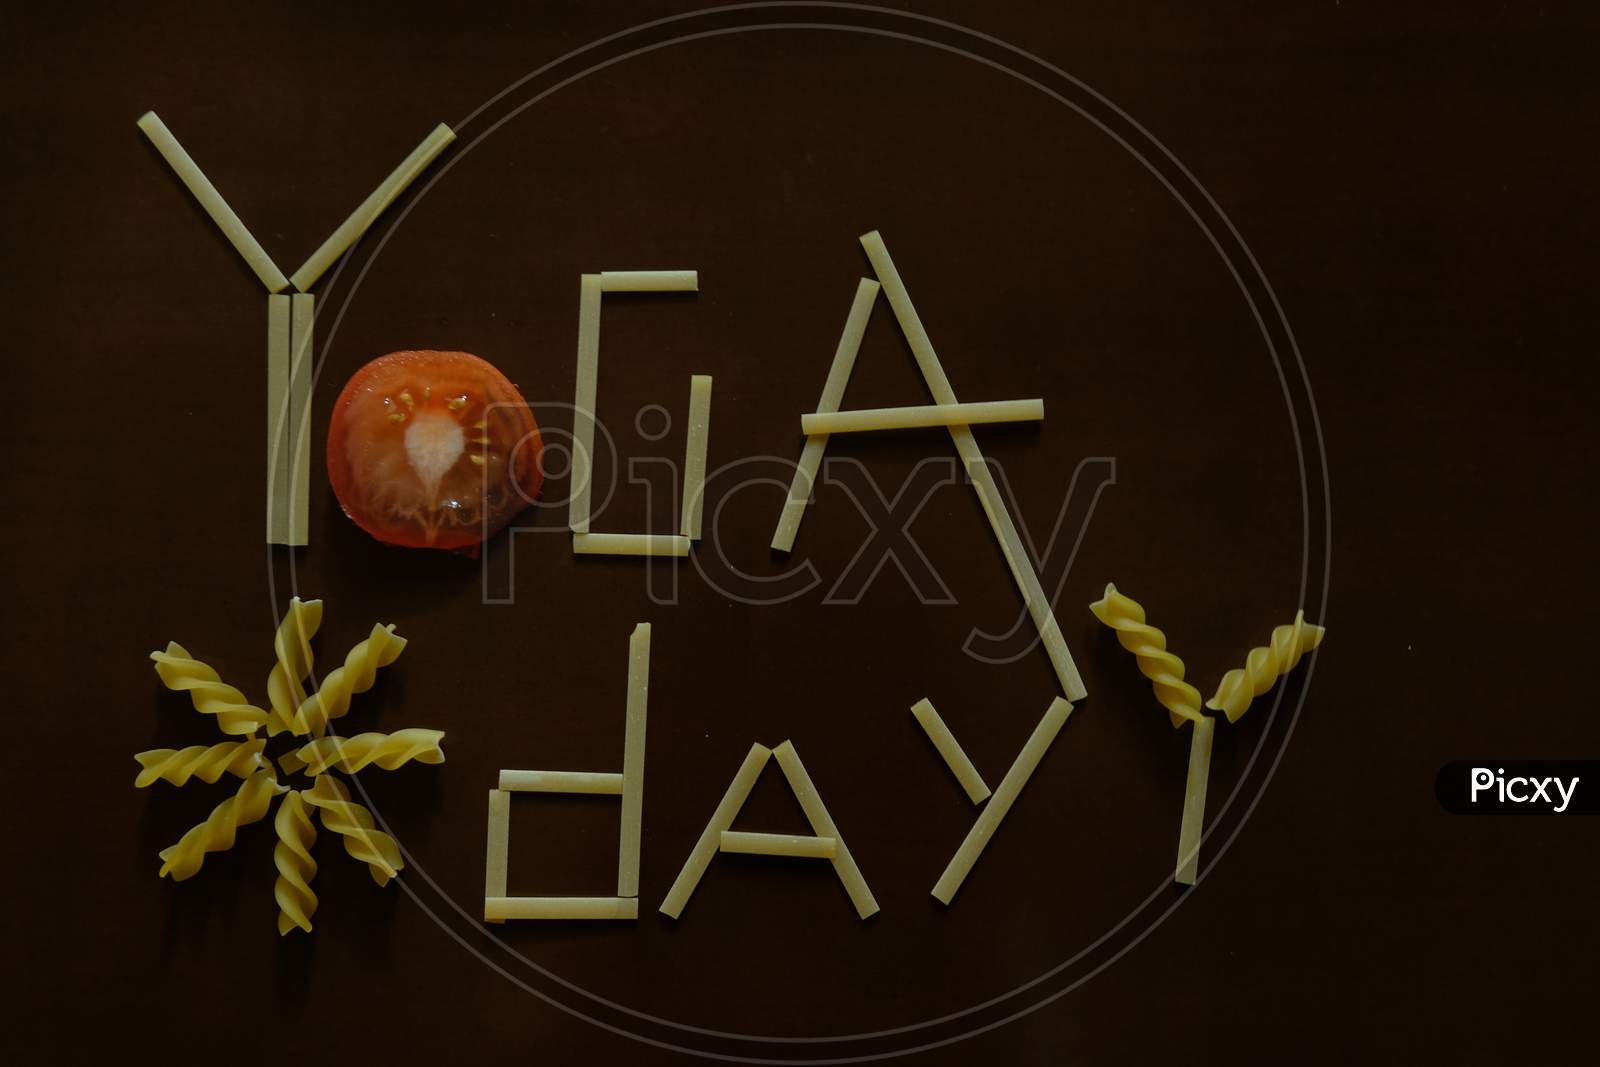 Yoga day text with spaghetti and tomato on a dark background